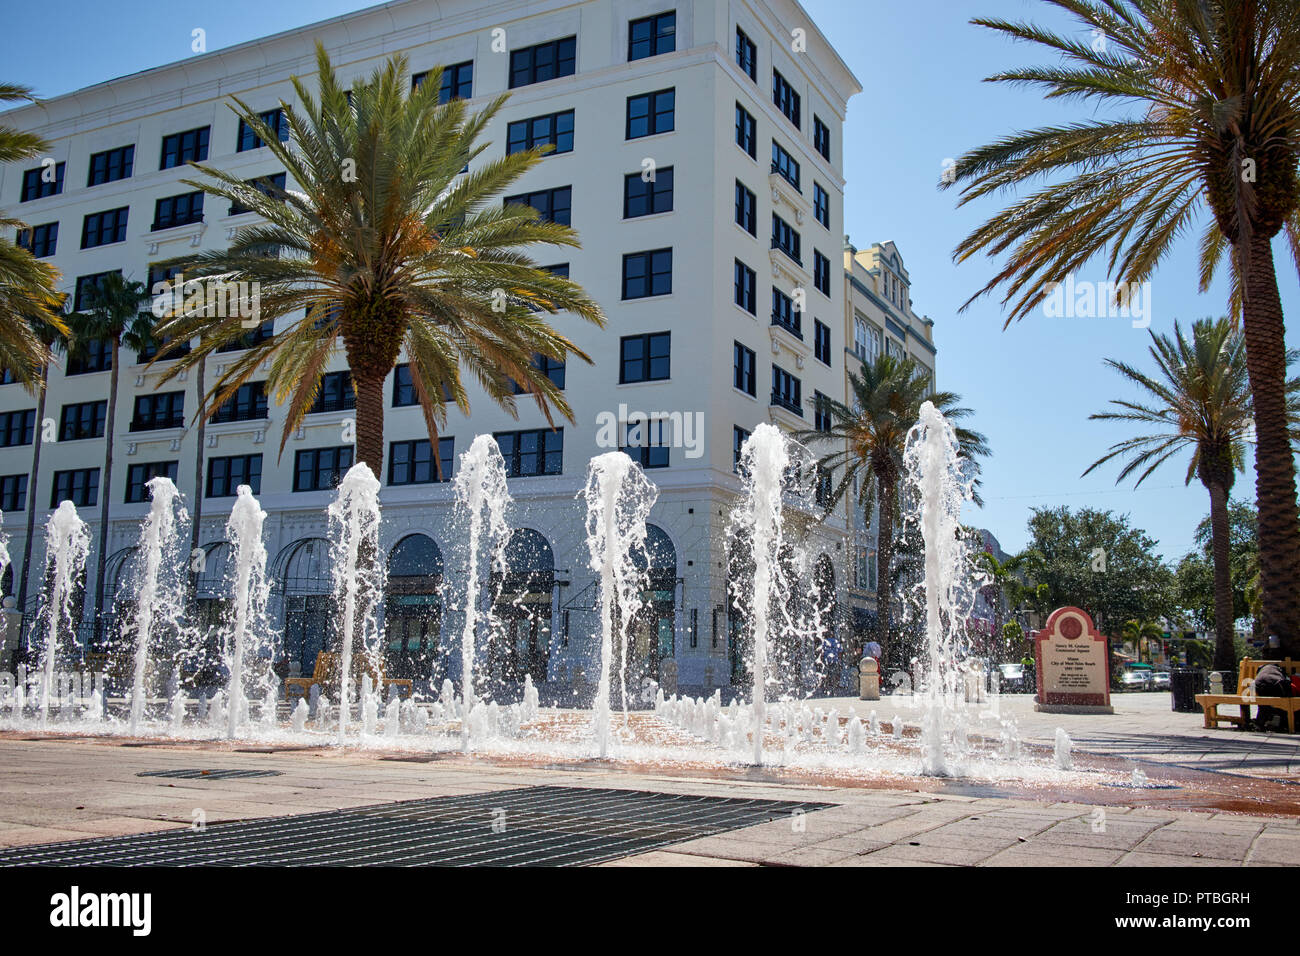 Fountains at Nancy M. Graham Centennial Square in downtown West Palm Beach, Florida Stock Photo